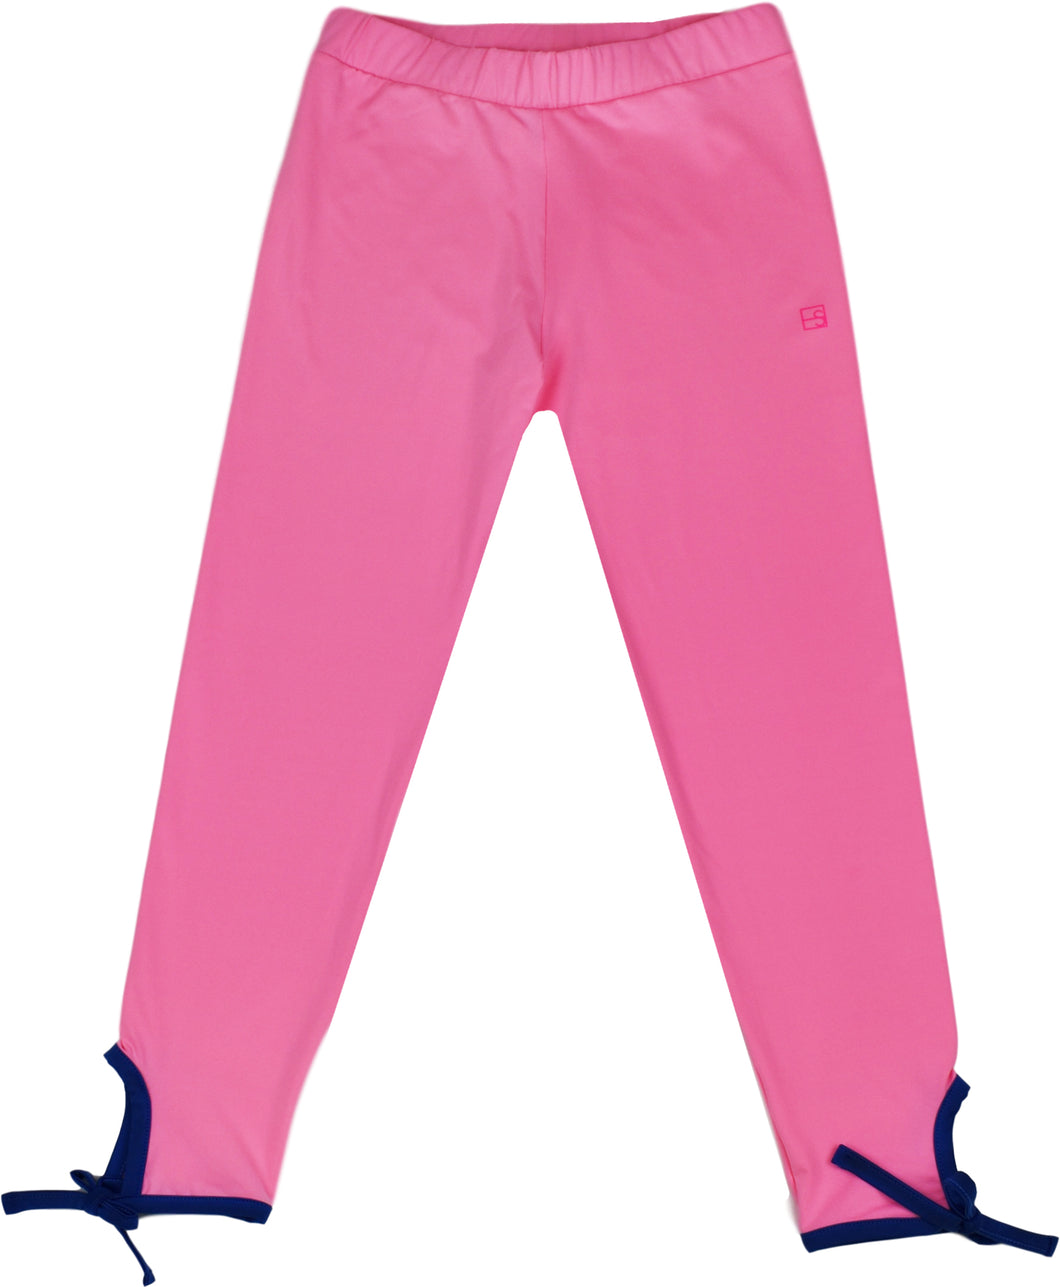 Avery Legging - Pink with Navy Ankle Ties